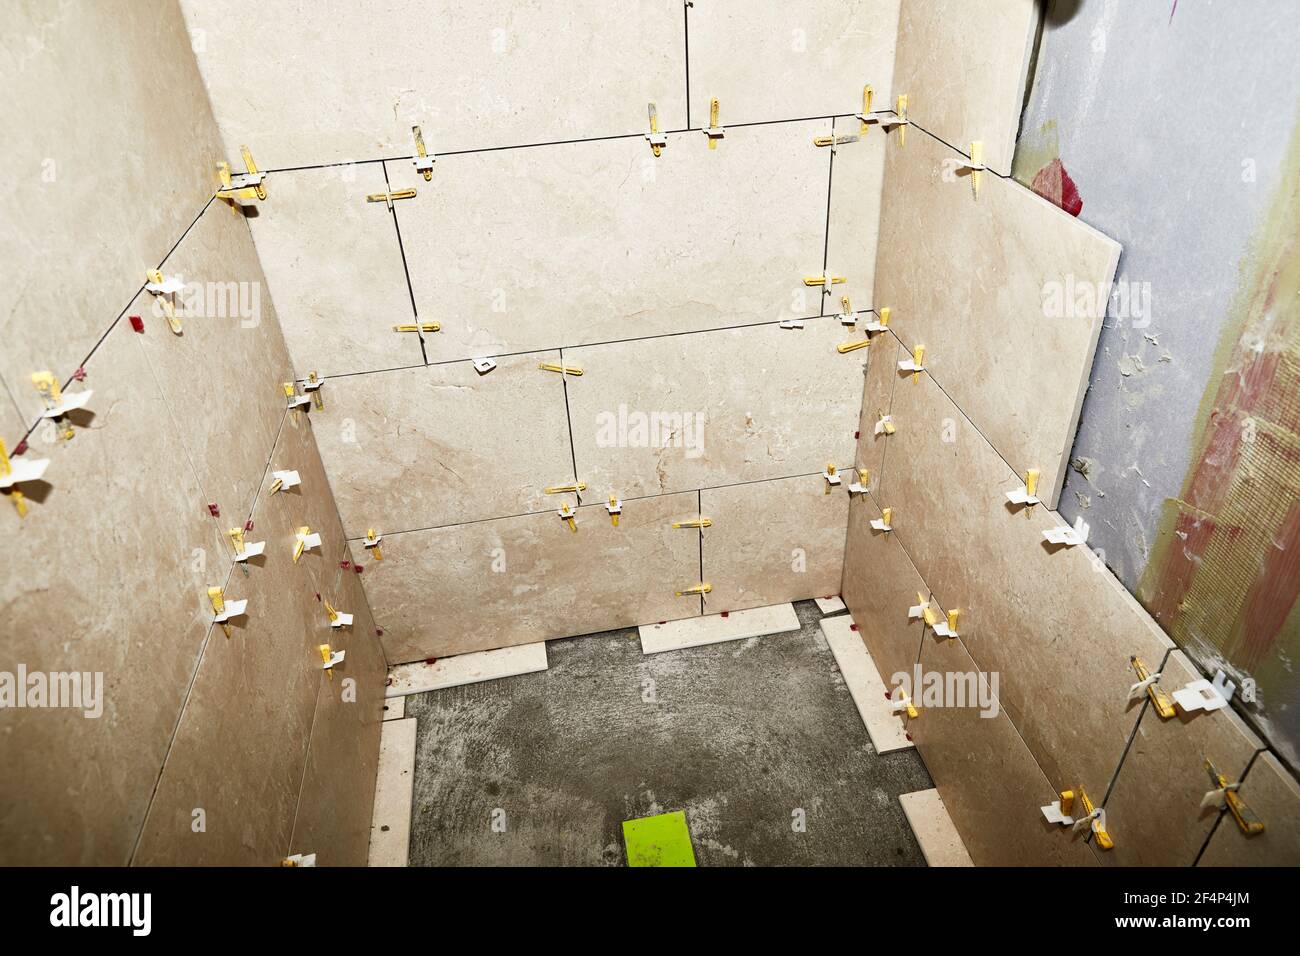 shower stall wall with grout spacers in preparation for new porcelain tile installation Stock Photo